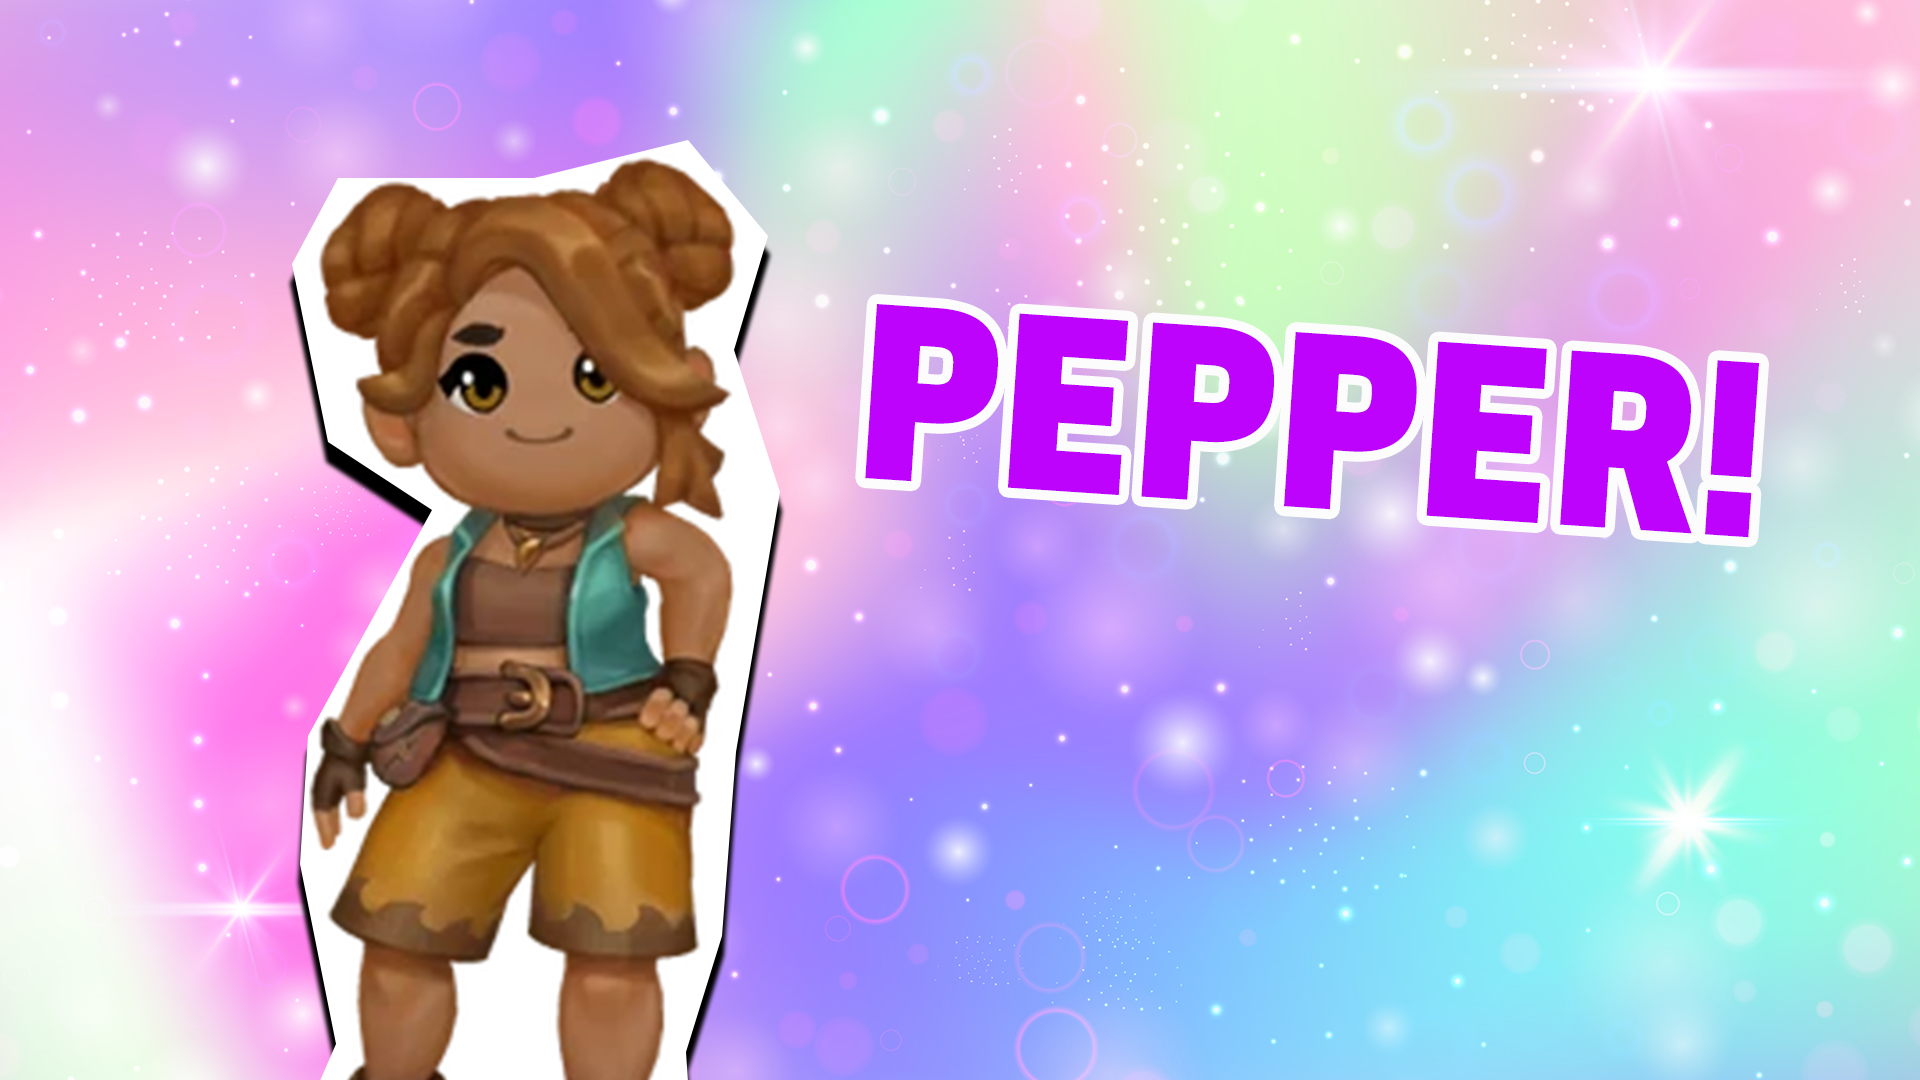 You're Pepper! You're a bit of a foodie and have a passion for cuisine, and you're always trying new flavours and recipes!